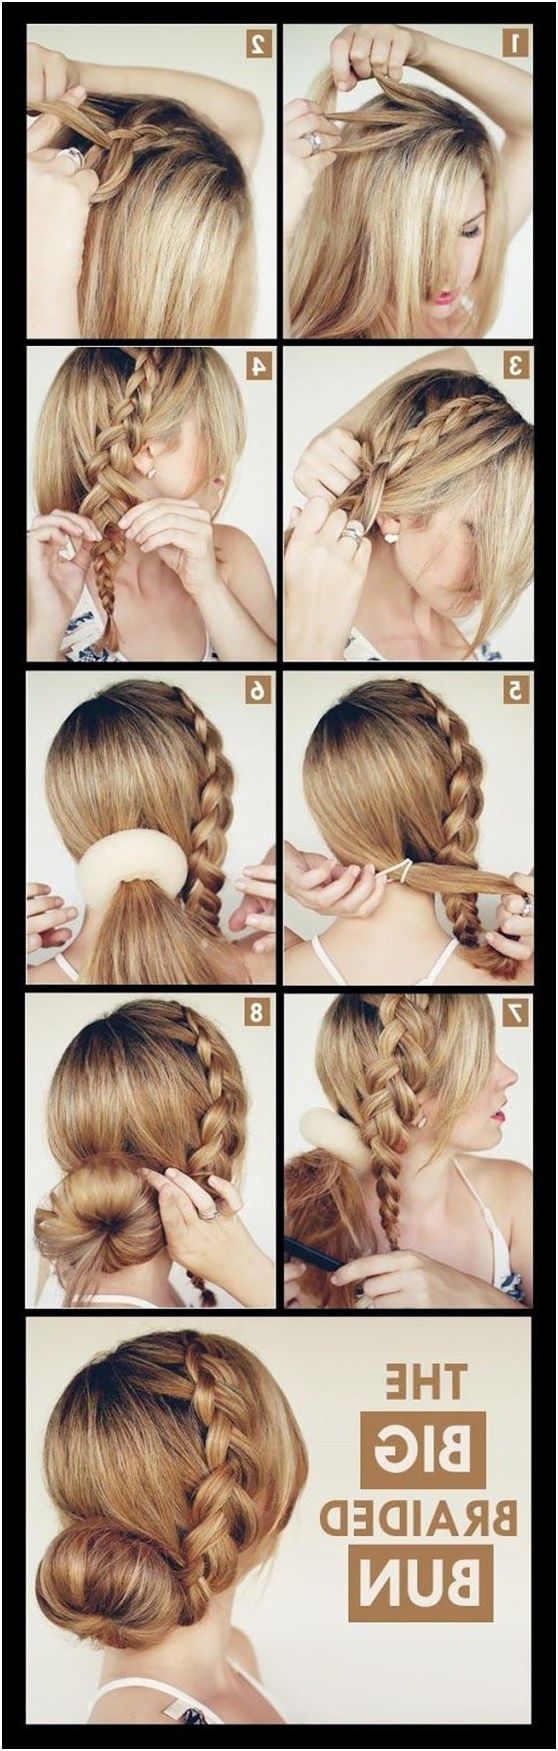 2017 Bun And Three Side Braids Prom Updos For 15 Braided Updo Hairstyles Tutorials – Pretty Designs (View 9 of 20)